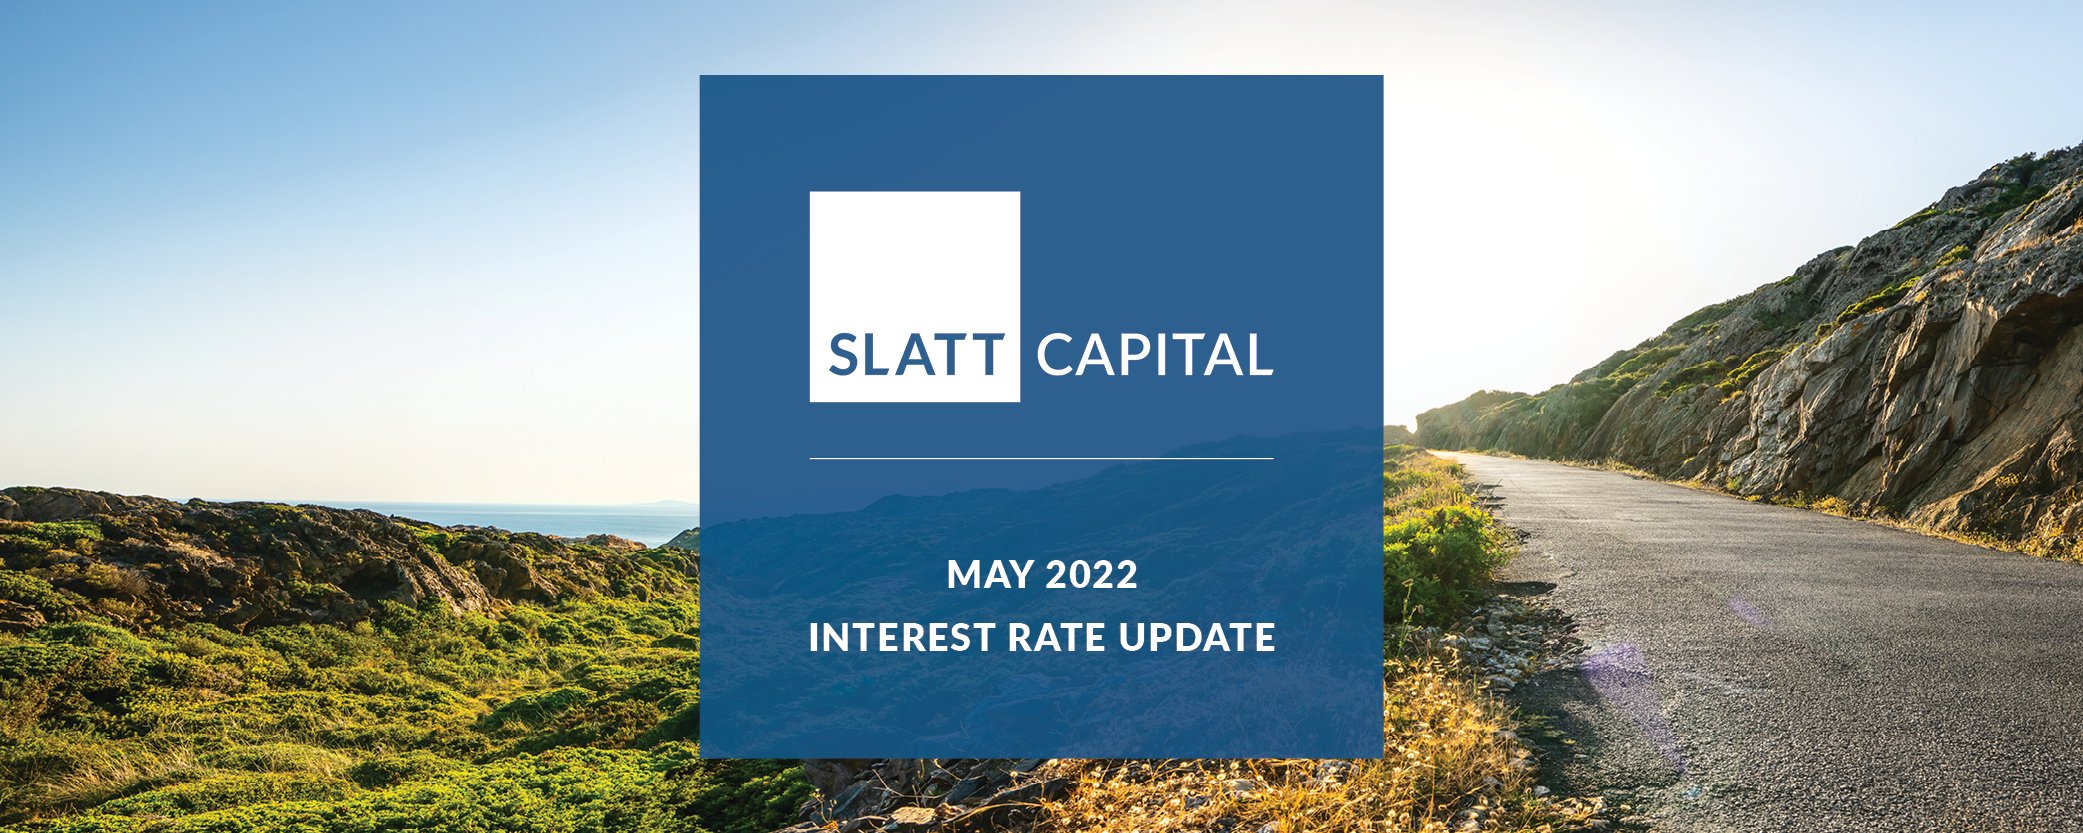 May 2022 interest rate udpate